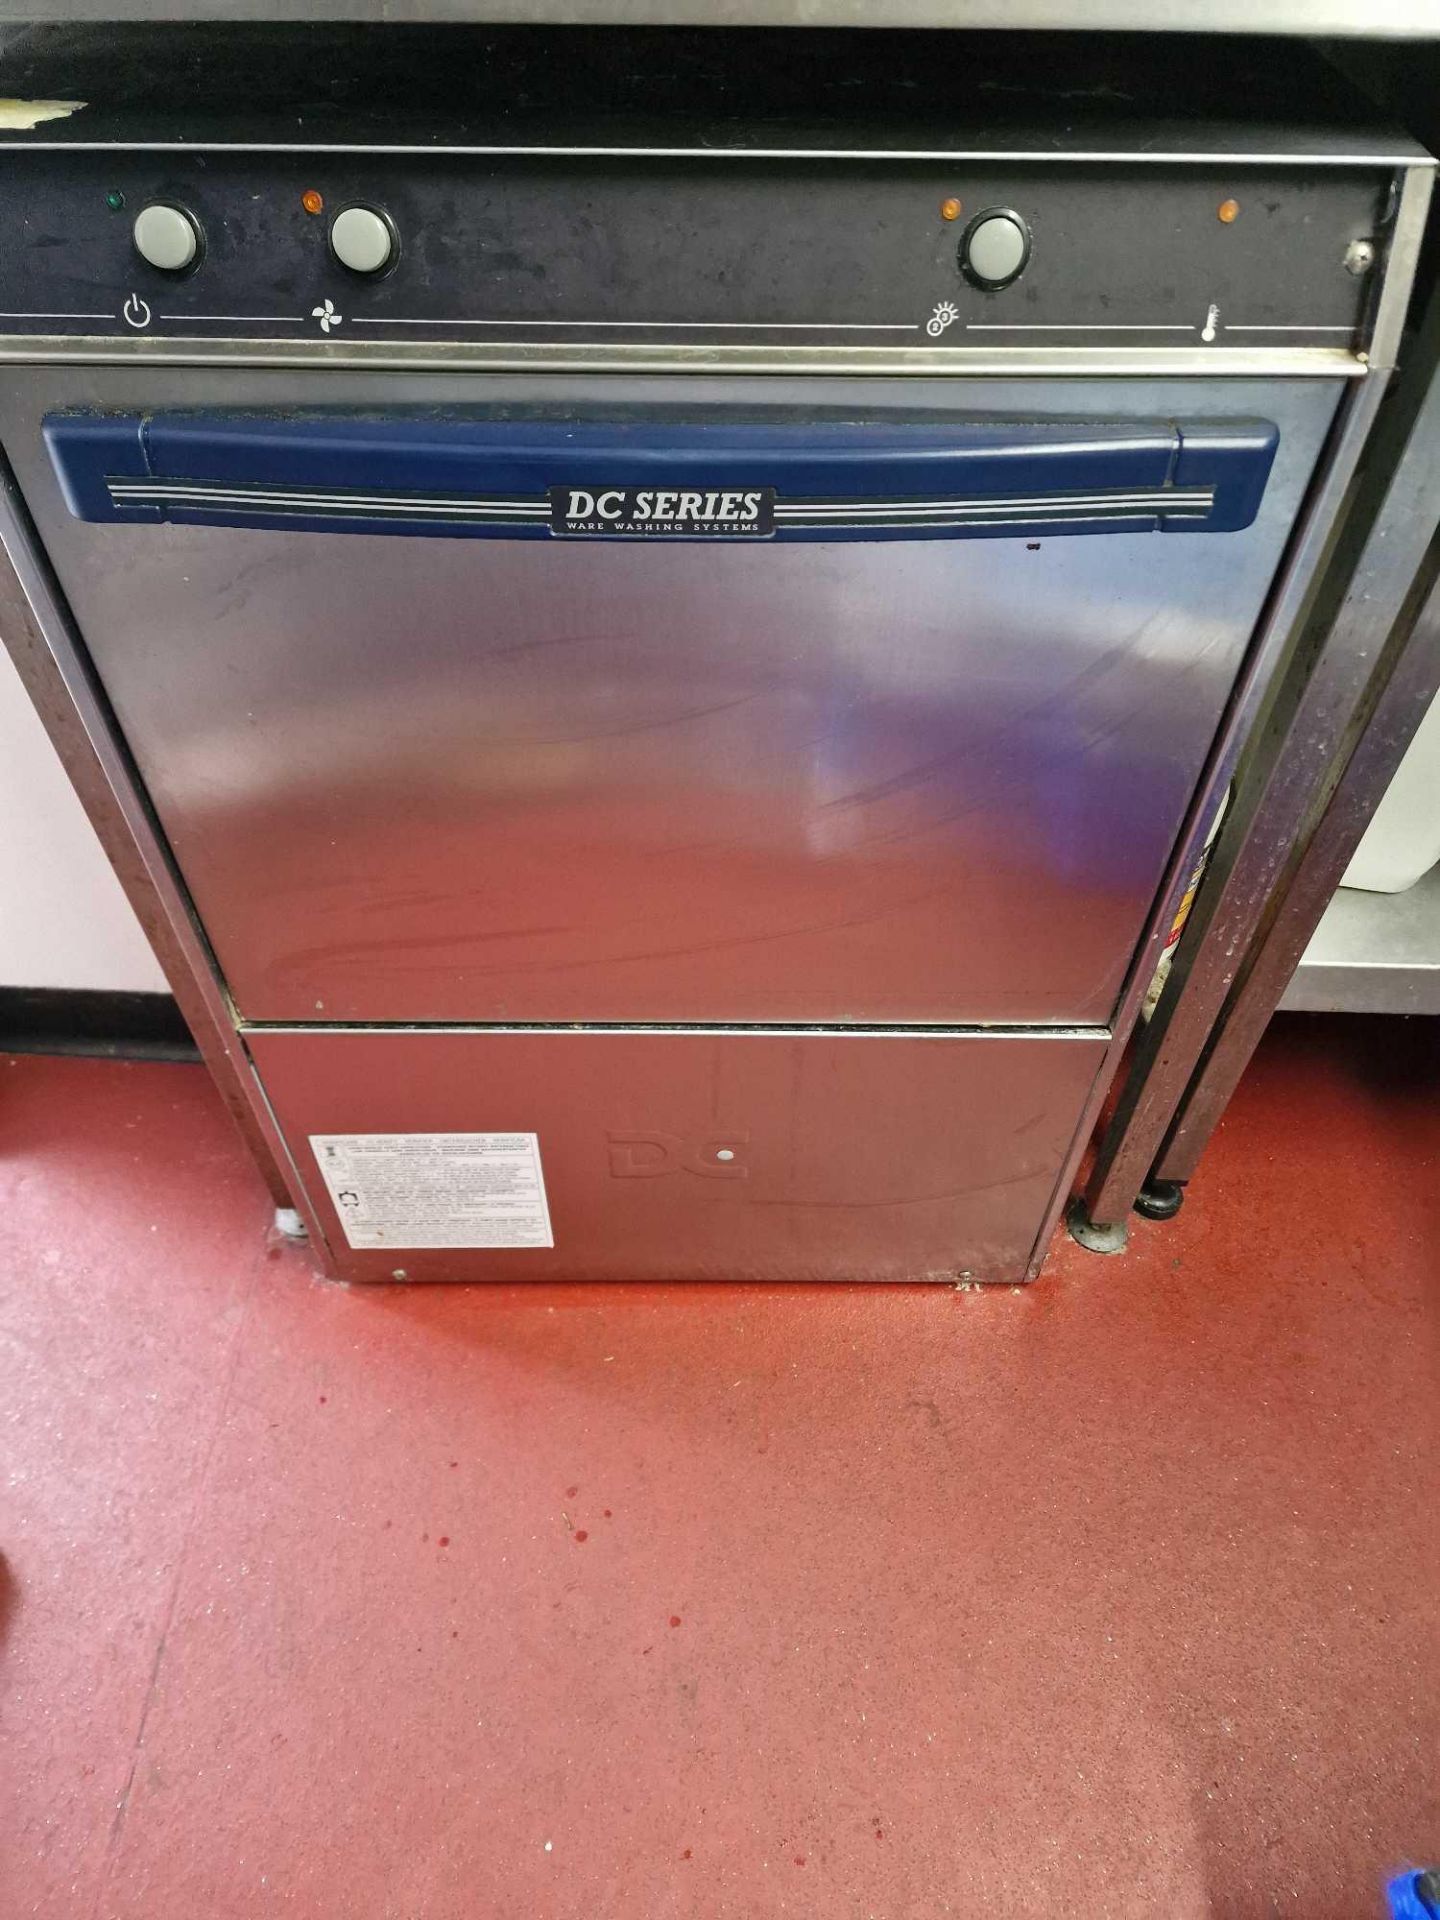 D.C Series SXD50 D 18 Plate Commercial Dishwasher With Drain Pump - 500mm Basket Cycle Time: 2 And 3